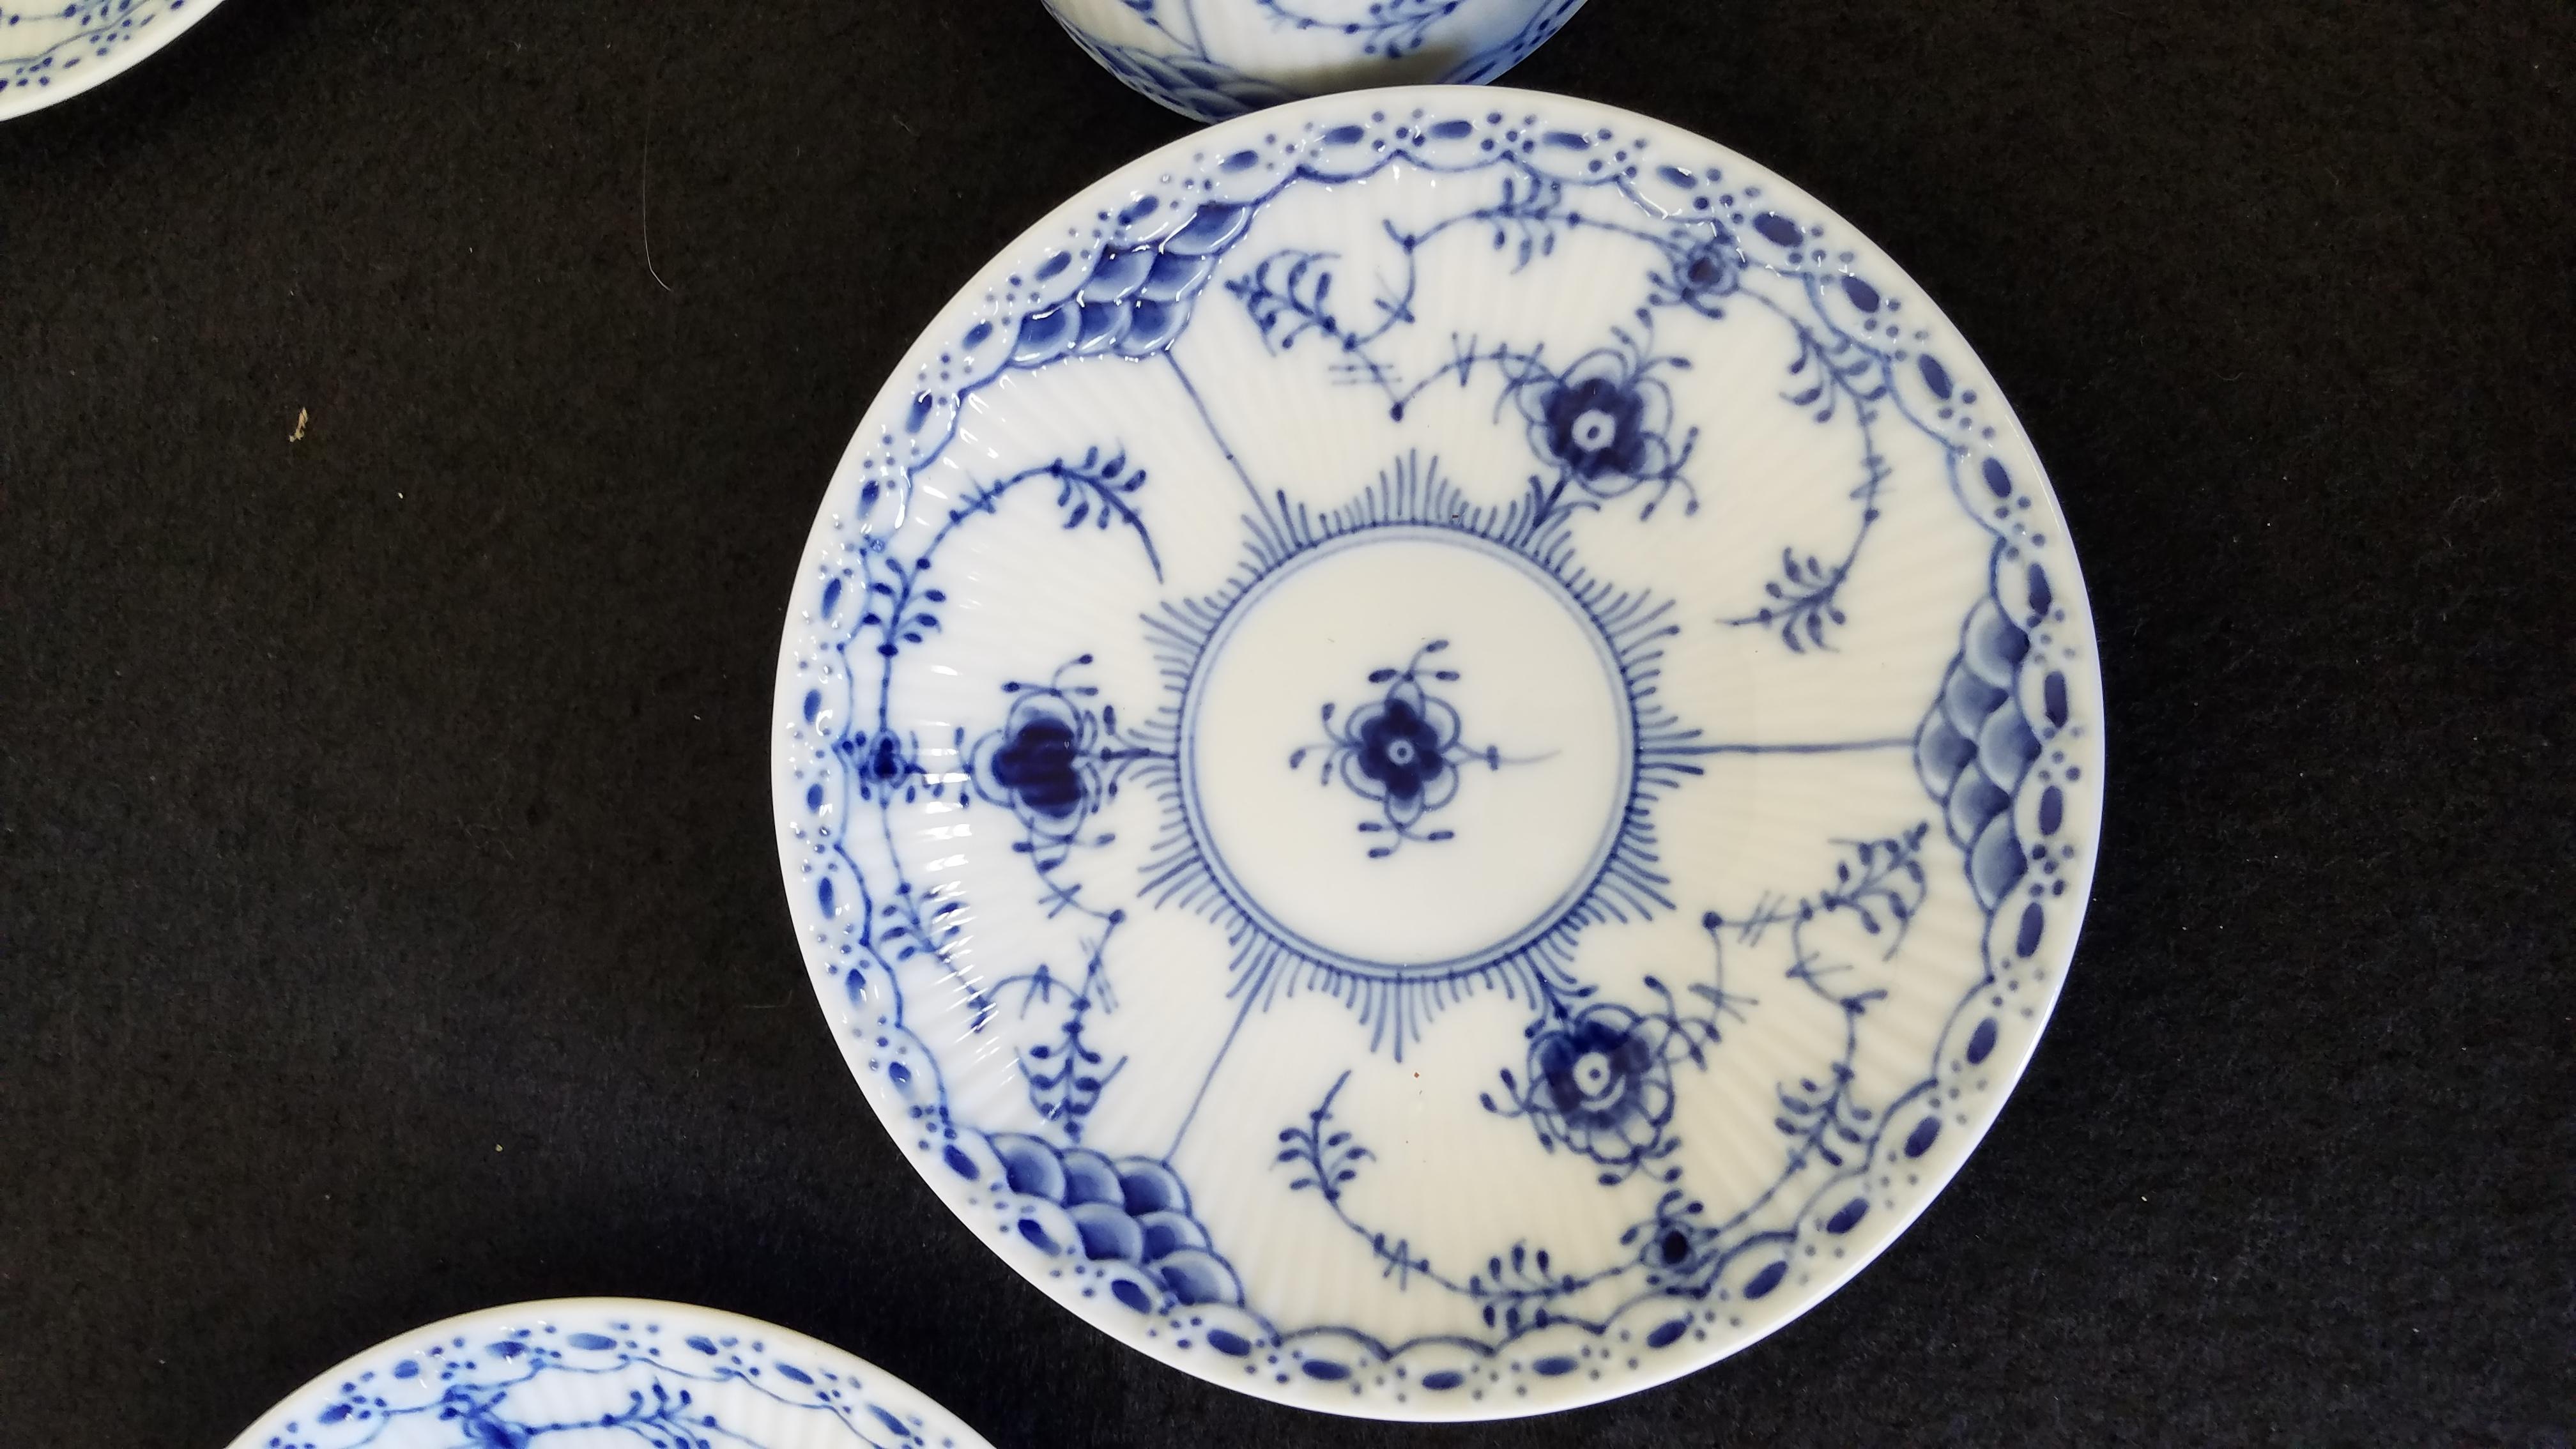 A set of eight royal Copenhagen porcelain espresso cups and saucers in the most desirable half lace pattern. Each one clearly marked on the underside.